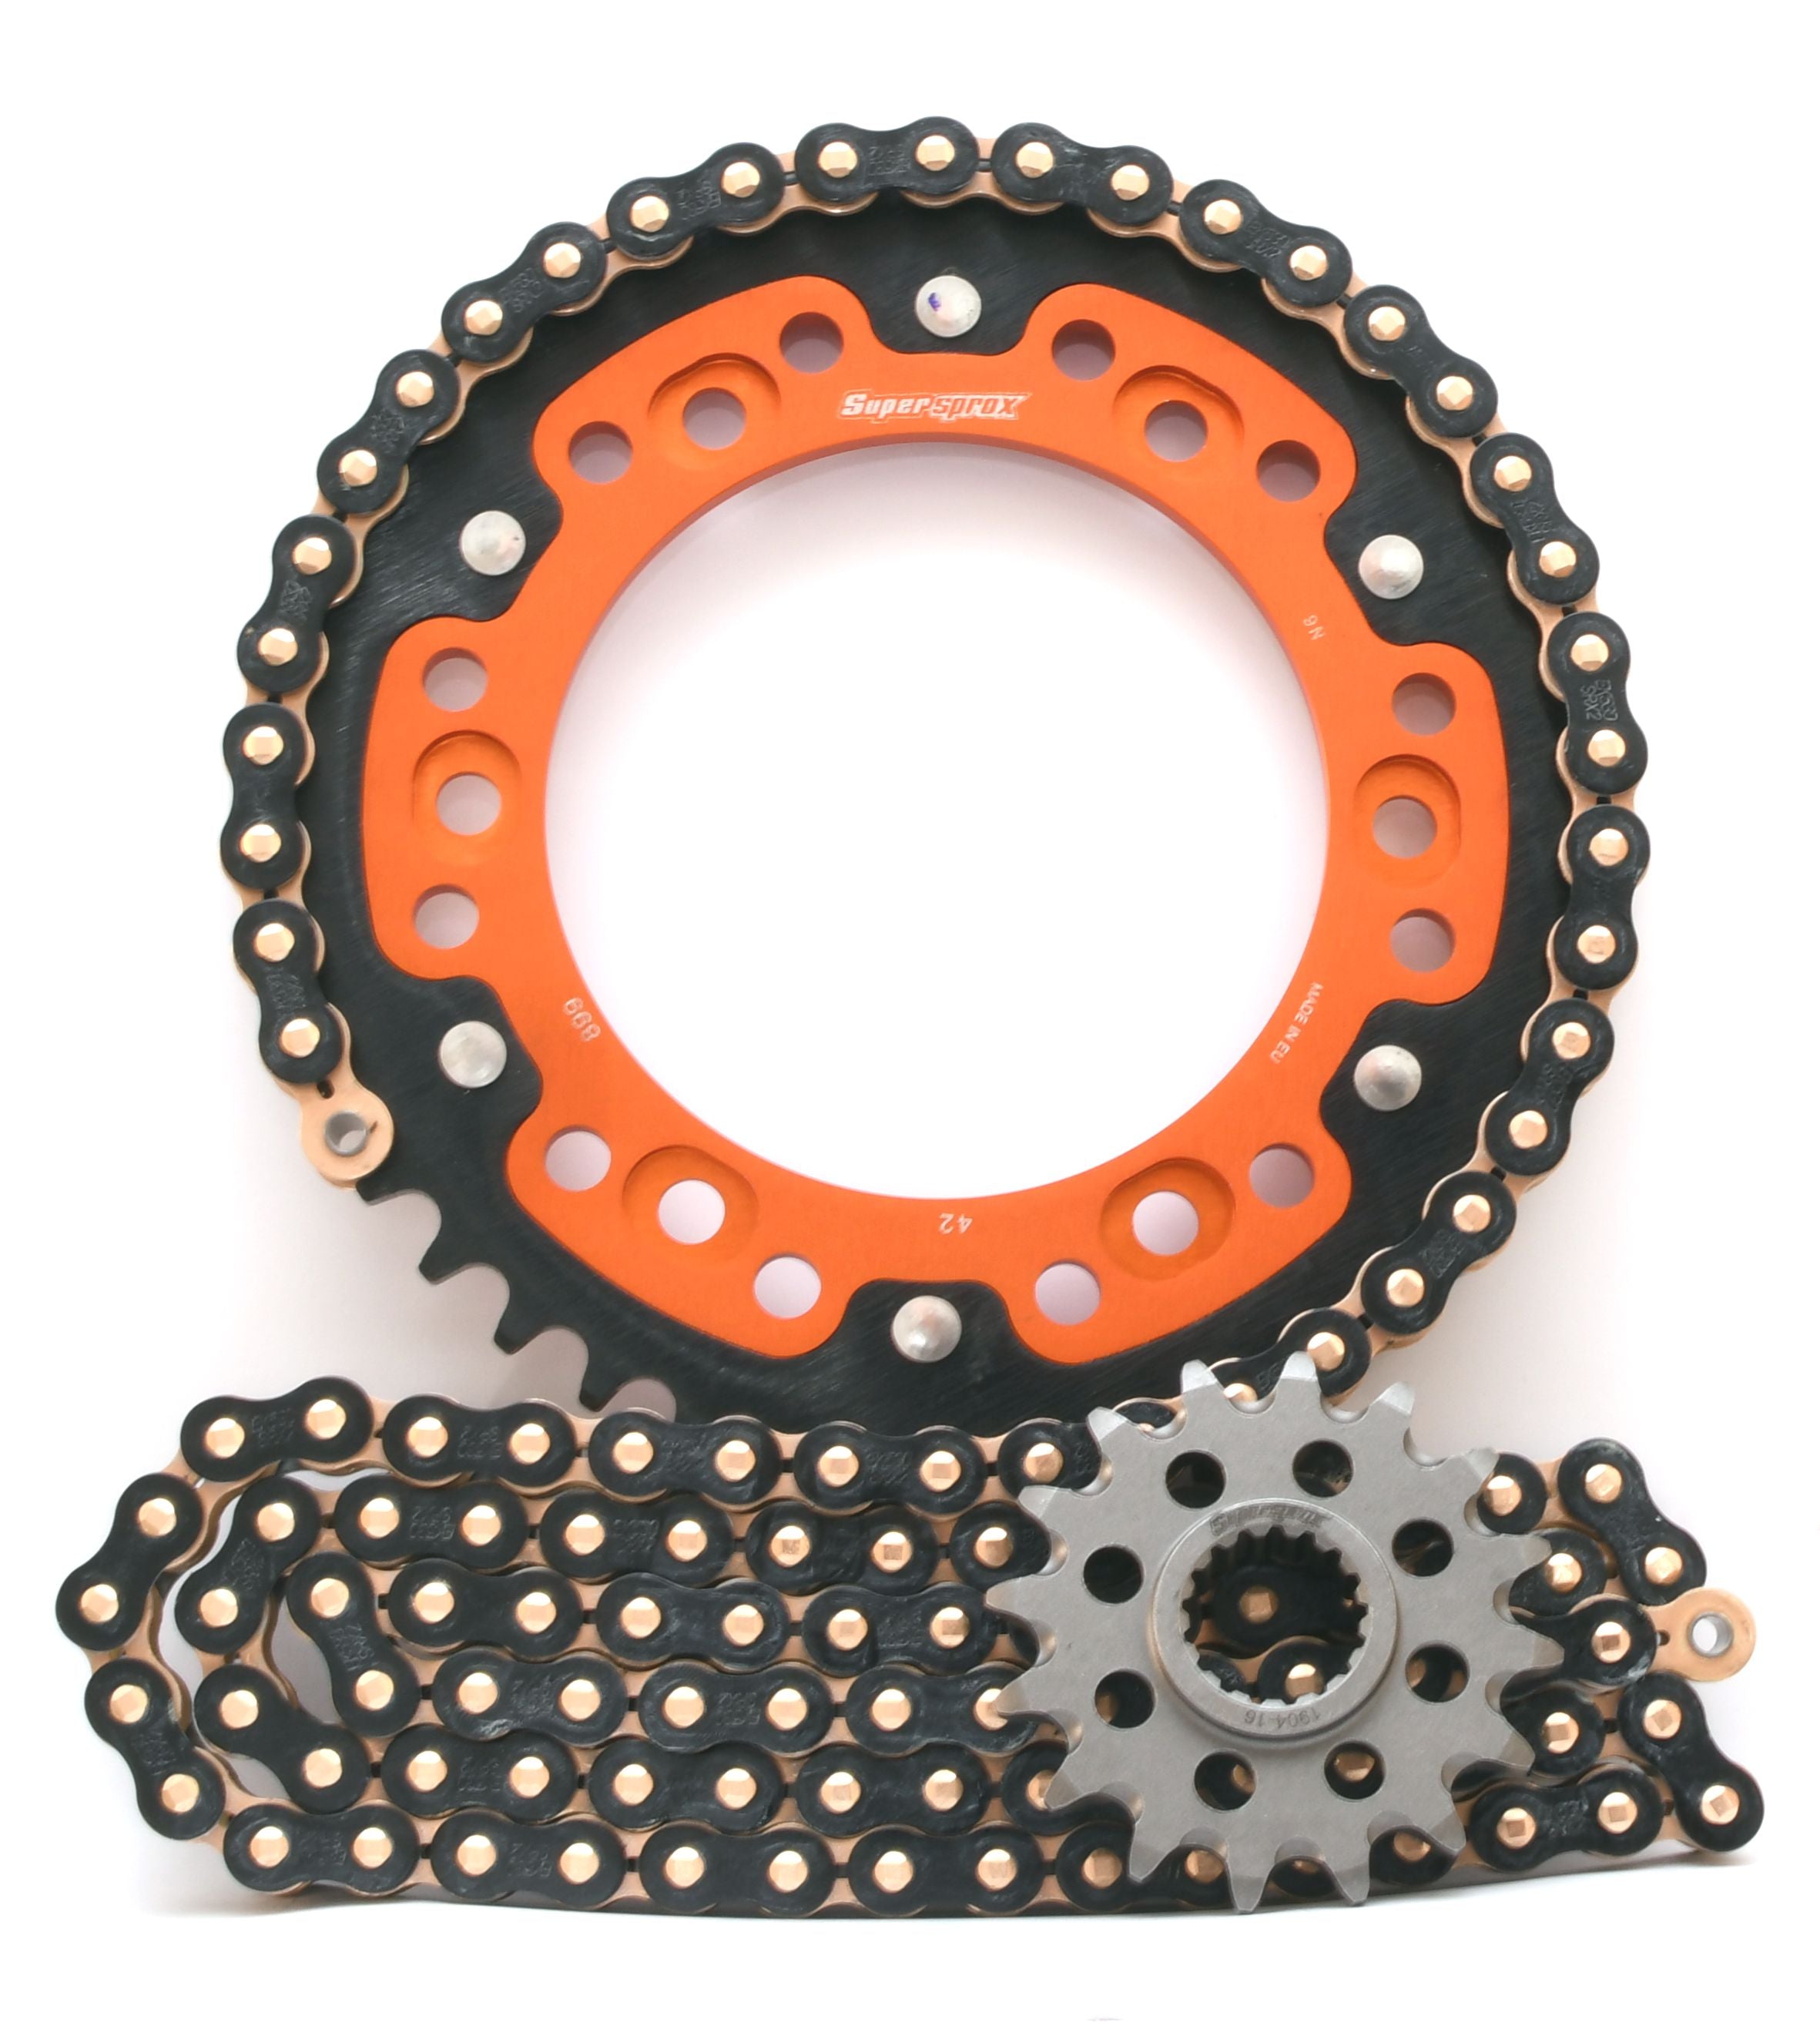 Supersprox Chain & Sprocket Kit for KTM 990 Adventure 2006-2012 (Inc S/R) - Standard Gearing